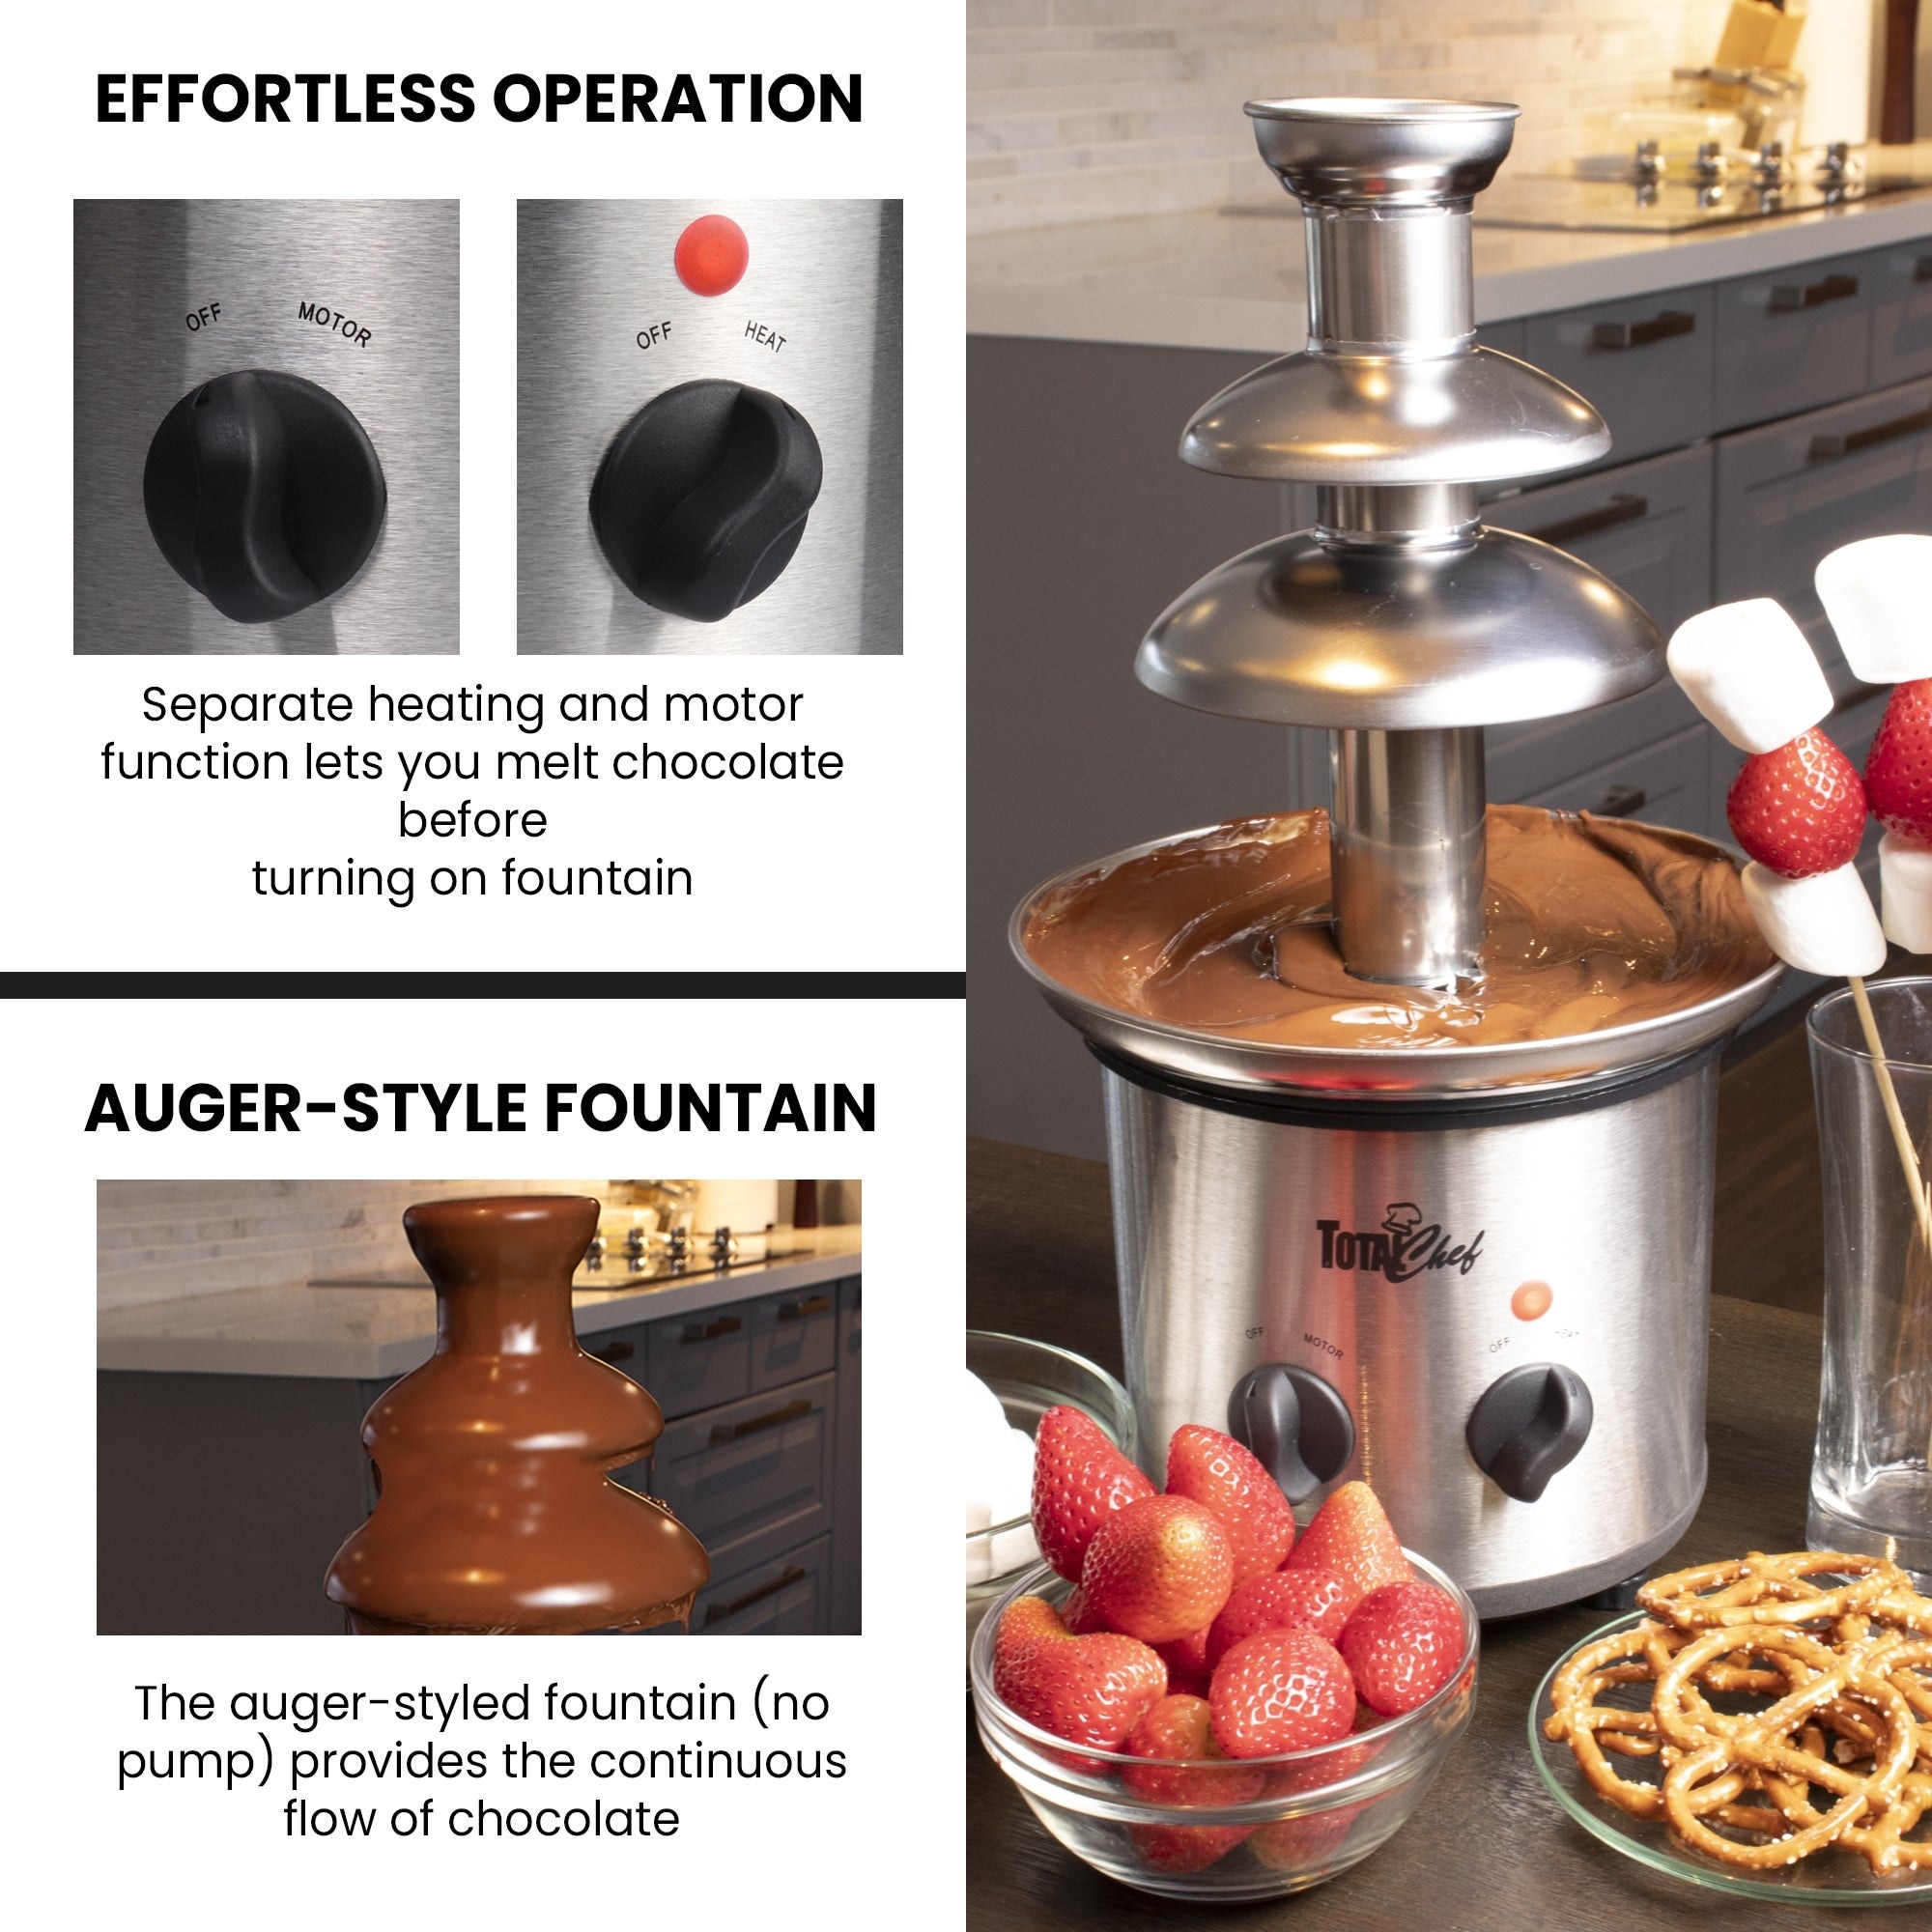 https://ak1.ostkcdn.com/images/products/is/images/direct/1b230c87e4b5023e87ce26a7d213e6556a6a6329/Total-Chef-3-Tier-Chocolate-Fountain%2C-1.5-lbs-%28680-g%29-Capacity-Electric-Chocolate-Fondue-Machine.jpg